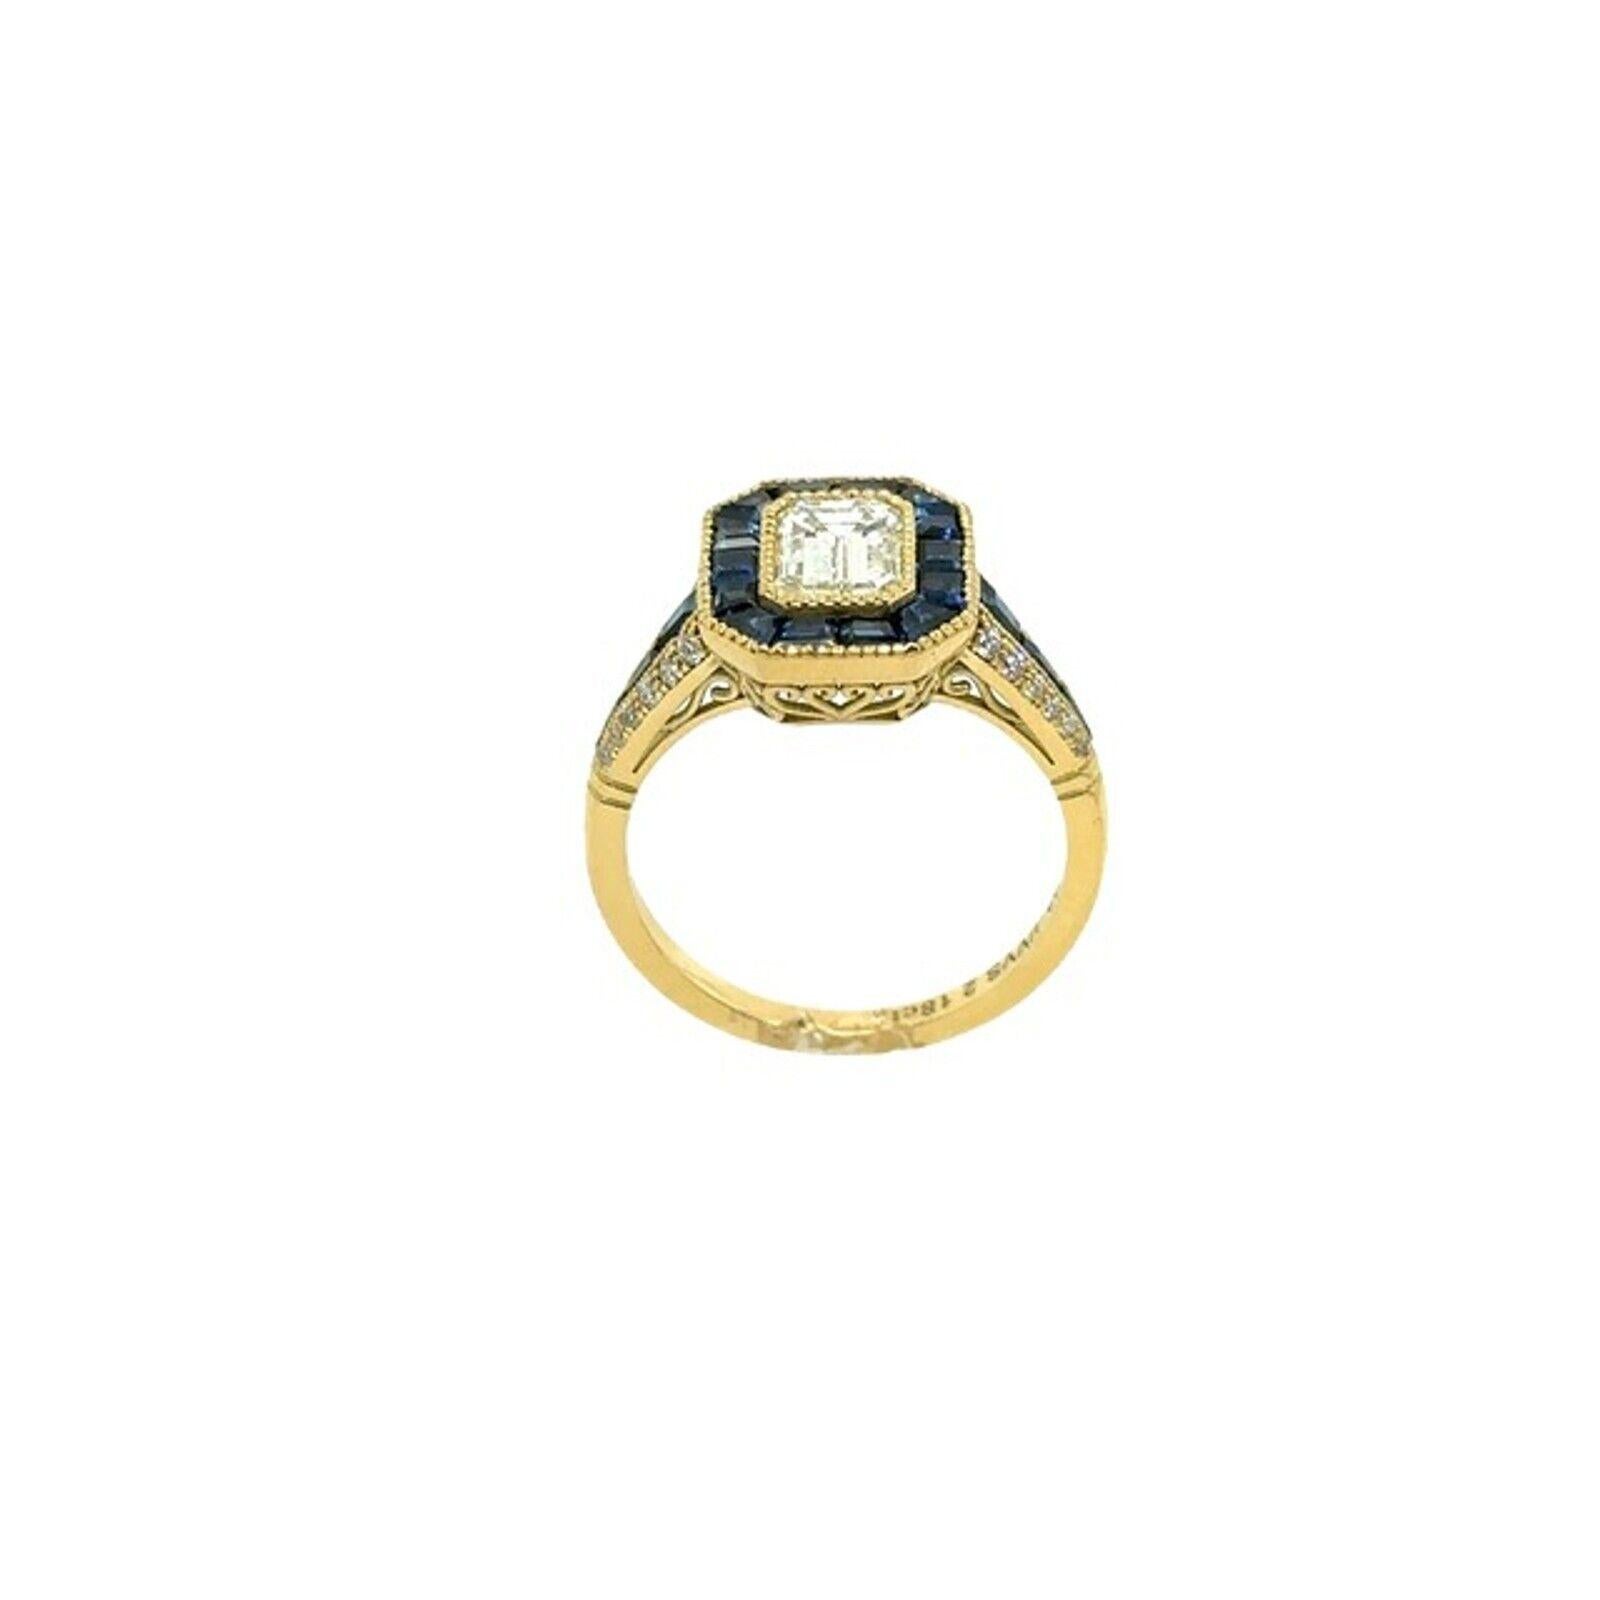 Art Deco 1.02ct J/VVS2 Emerald Cut Diamond with Sapphire Halo Ring in 18ct Yellow Gold For Sale